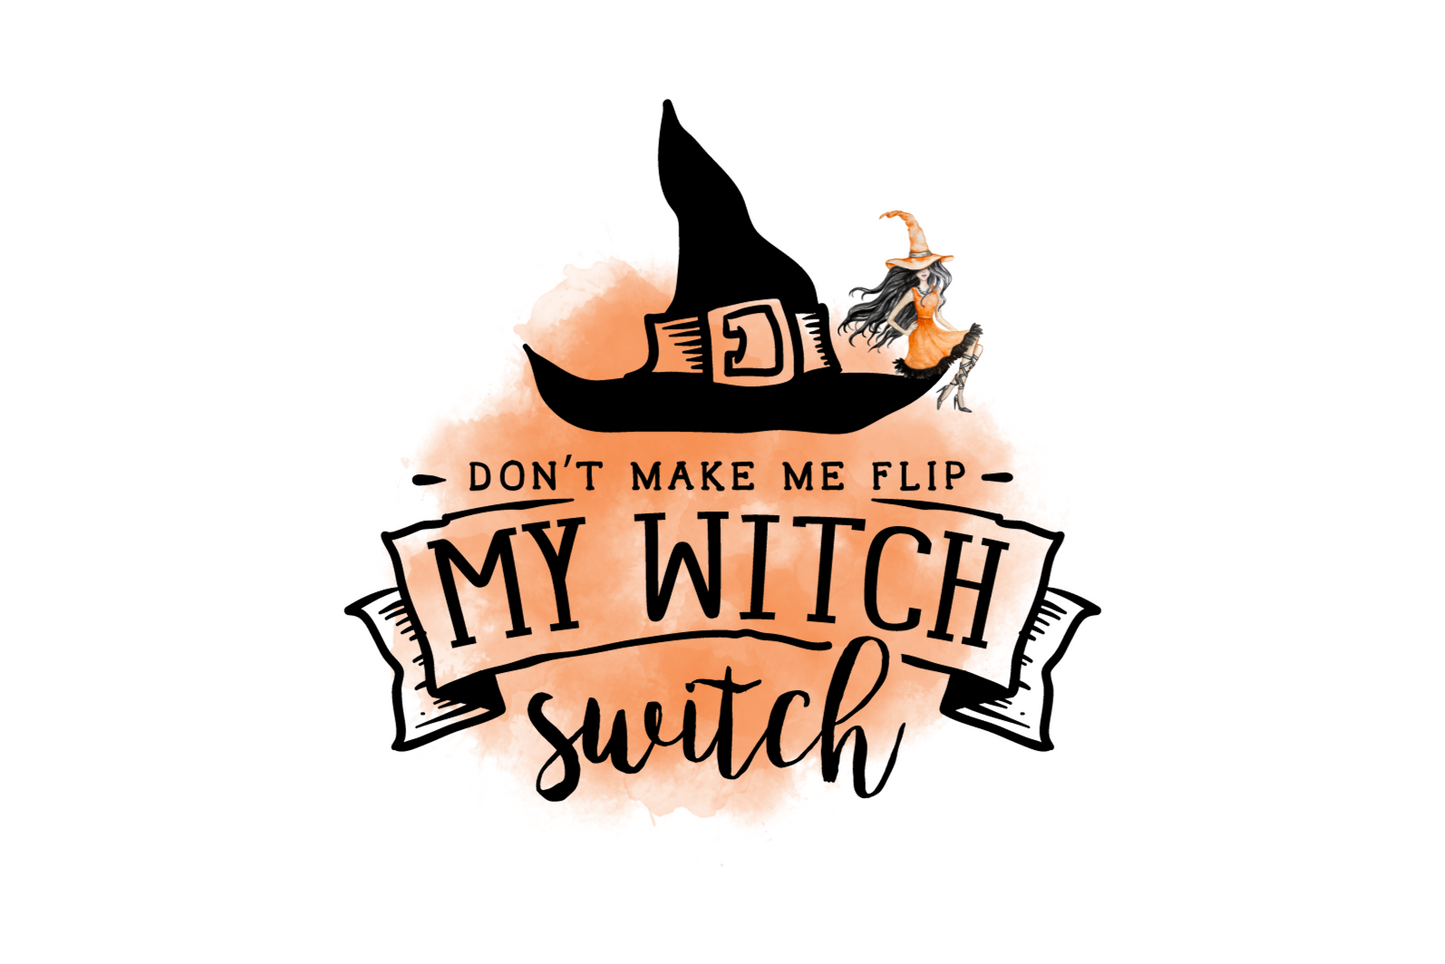 Don't make me flip. My Witch switch.